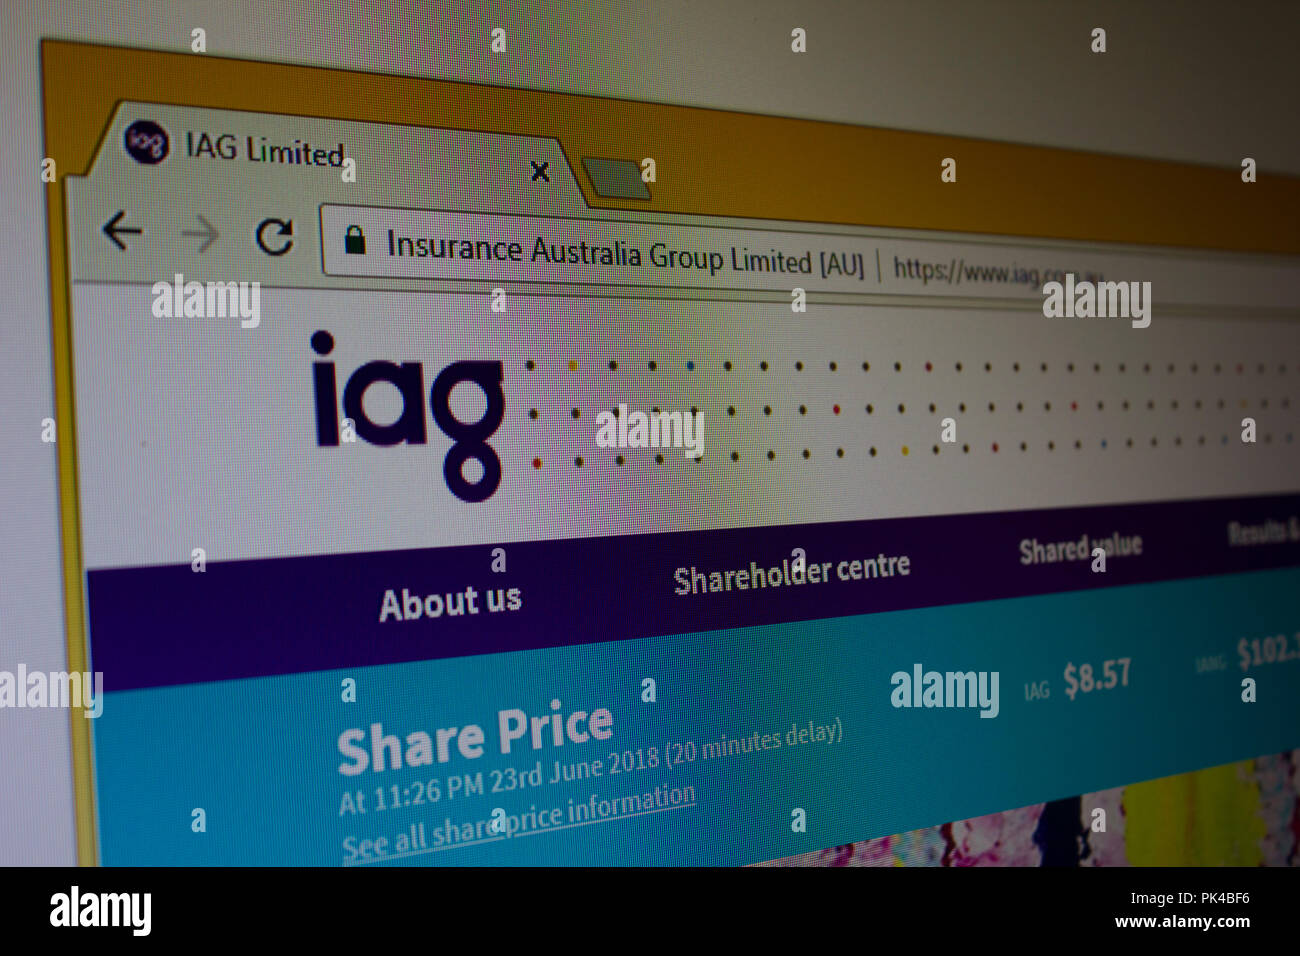 IAG Limited Website Homepage Stock Photo